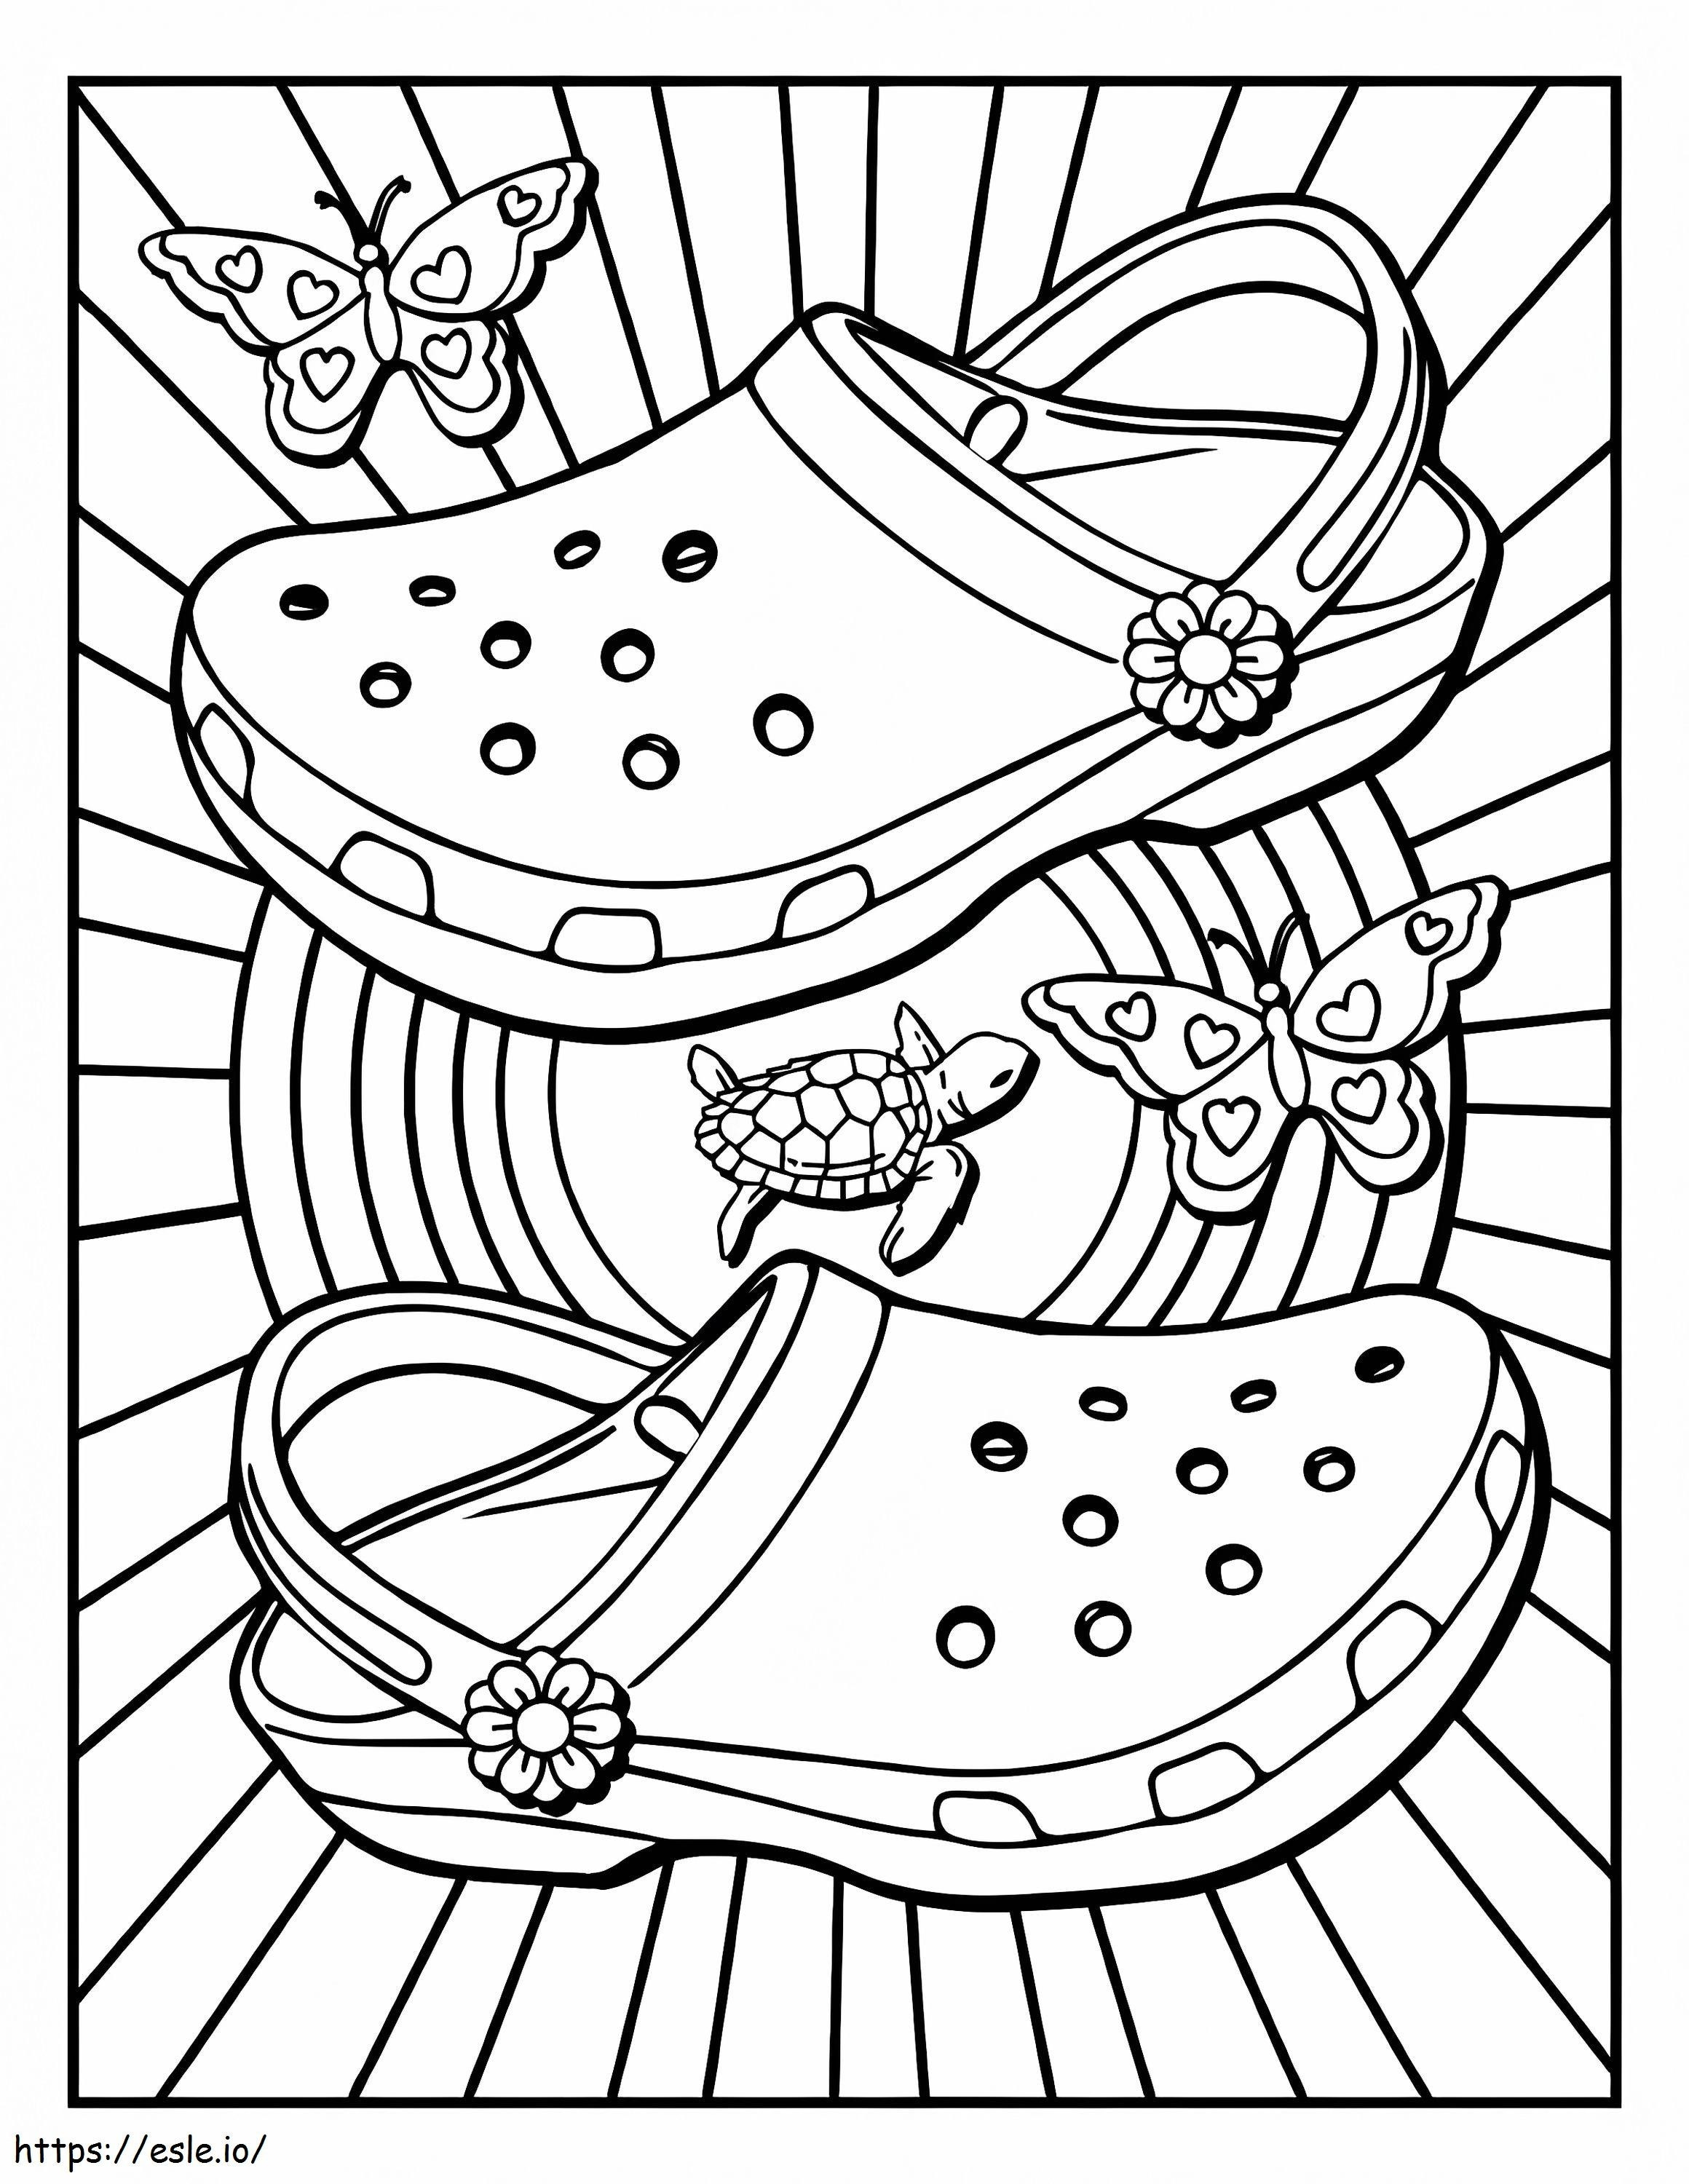 VSCO Girl Sandals coloring page